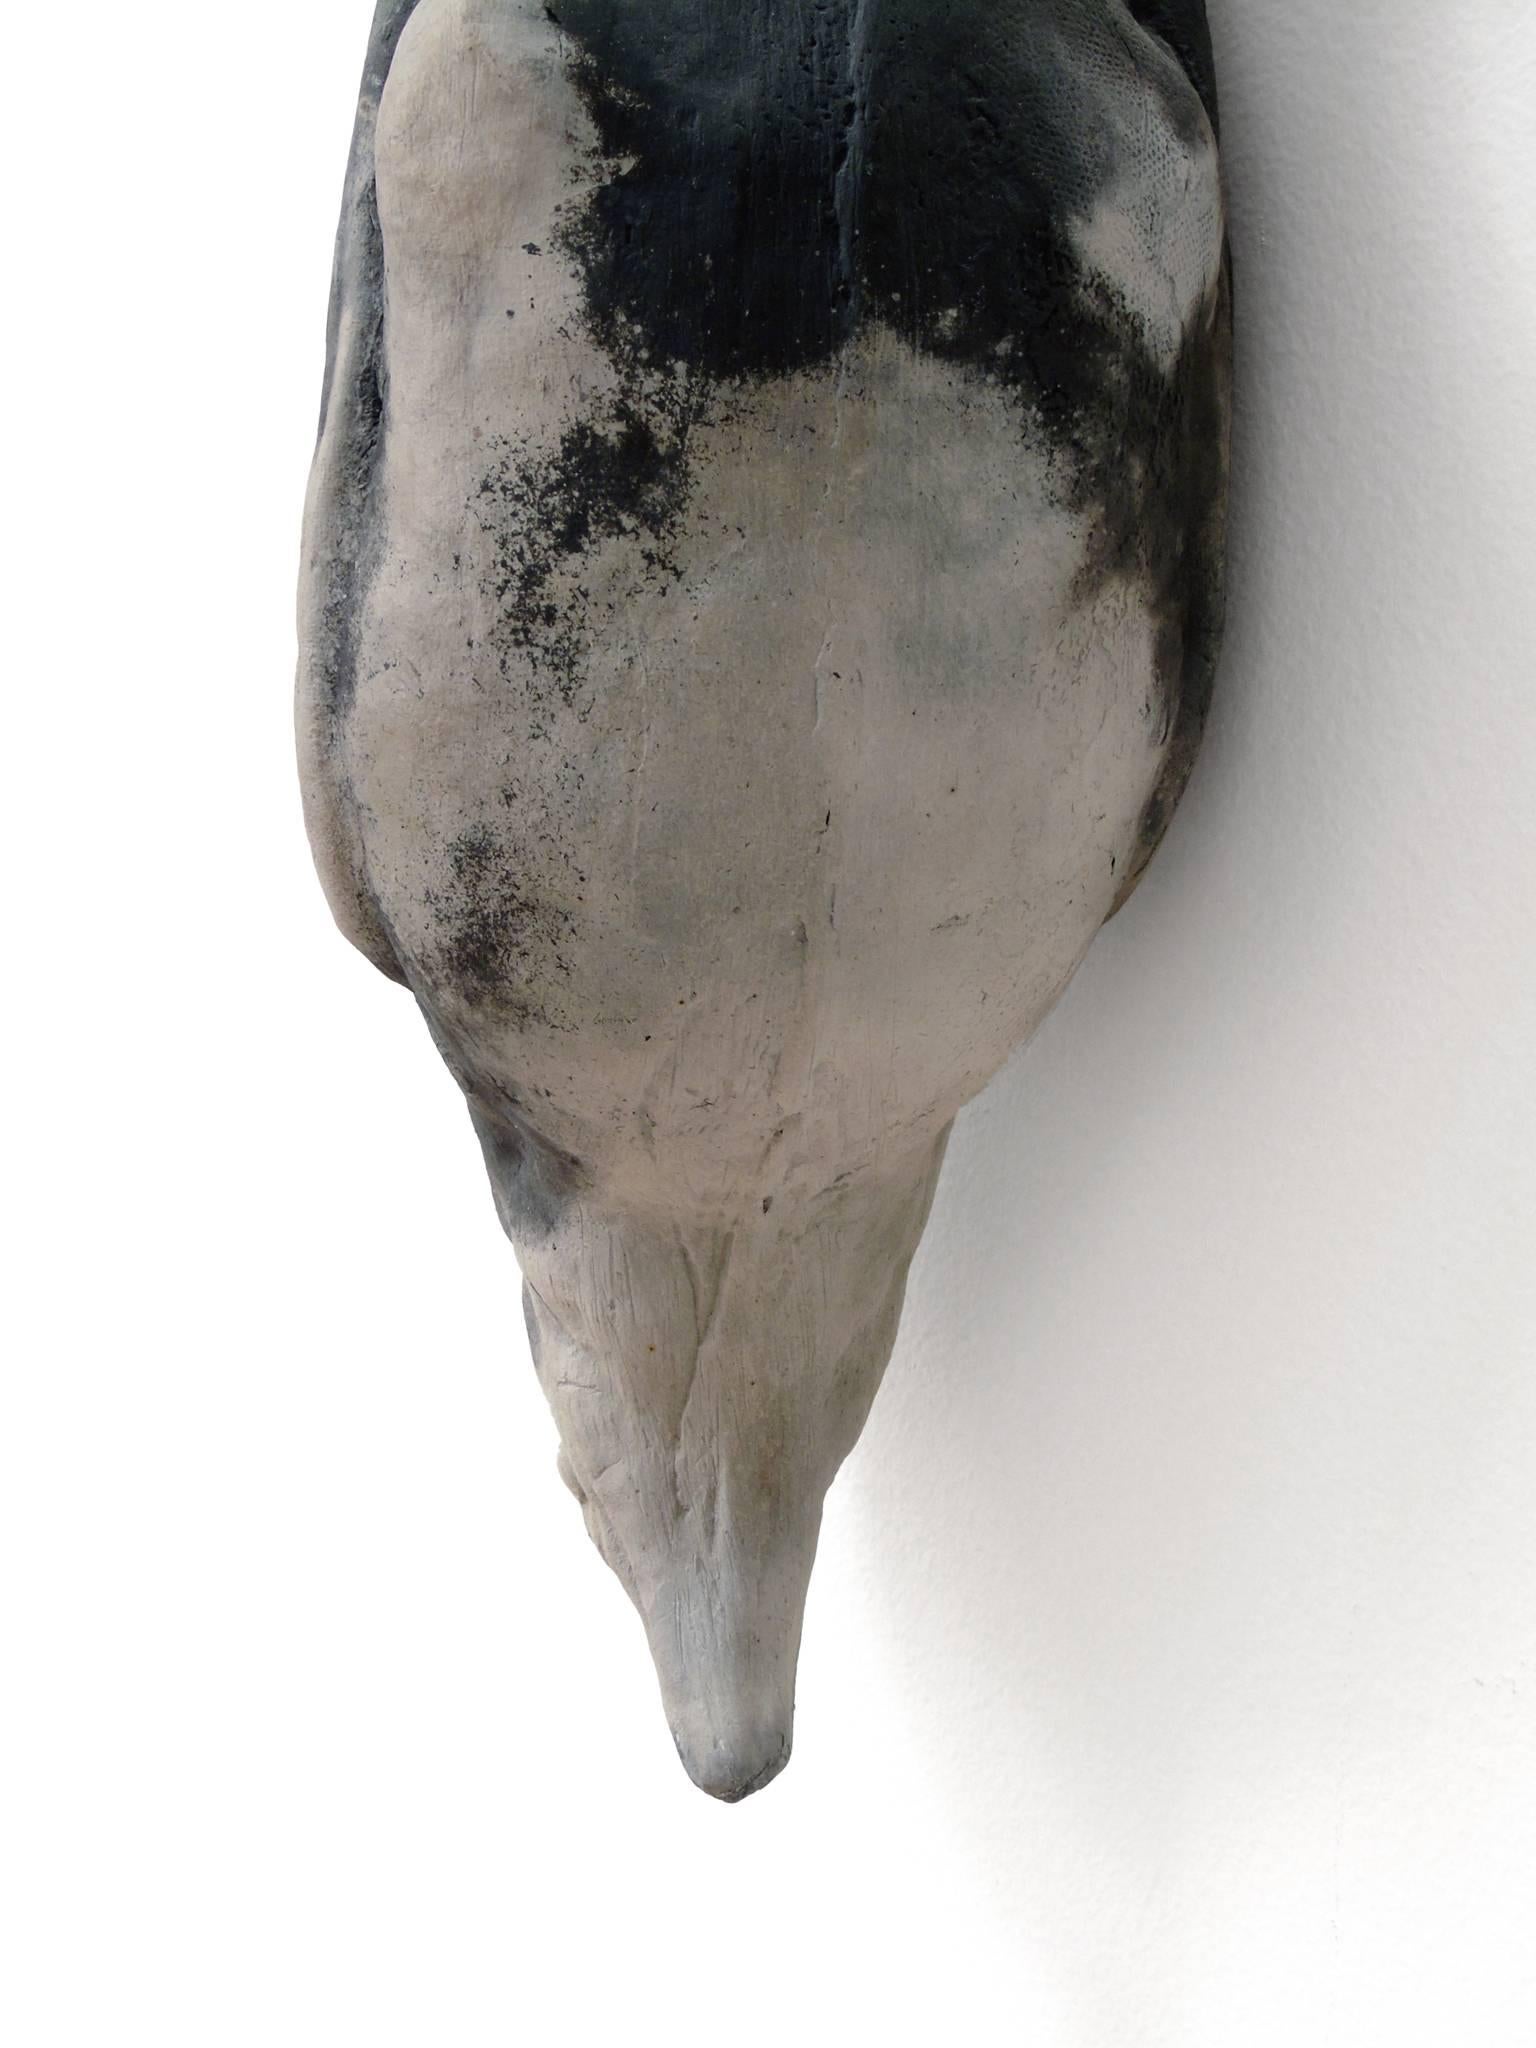 Messenger is a raku fired clay crow that hangs from a large nail. It is suspended below rolled paper notes that have been dipped in beeswax from artist Michael Roger's hives. The handwritten text on the paper is from poetry by Forrest Gander.